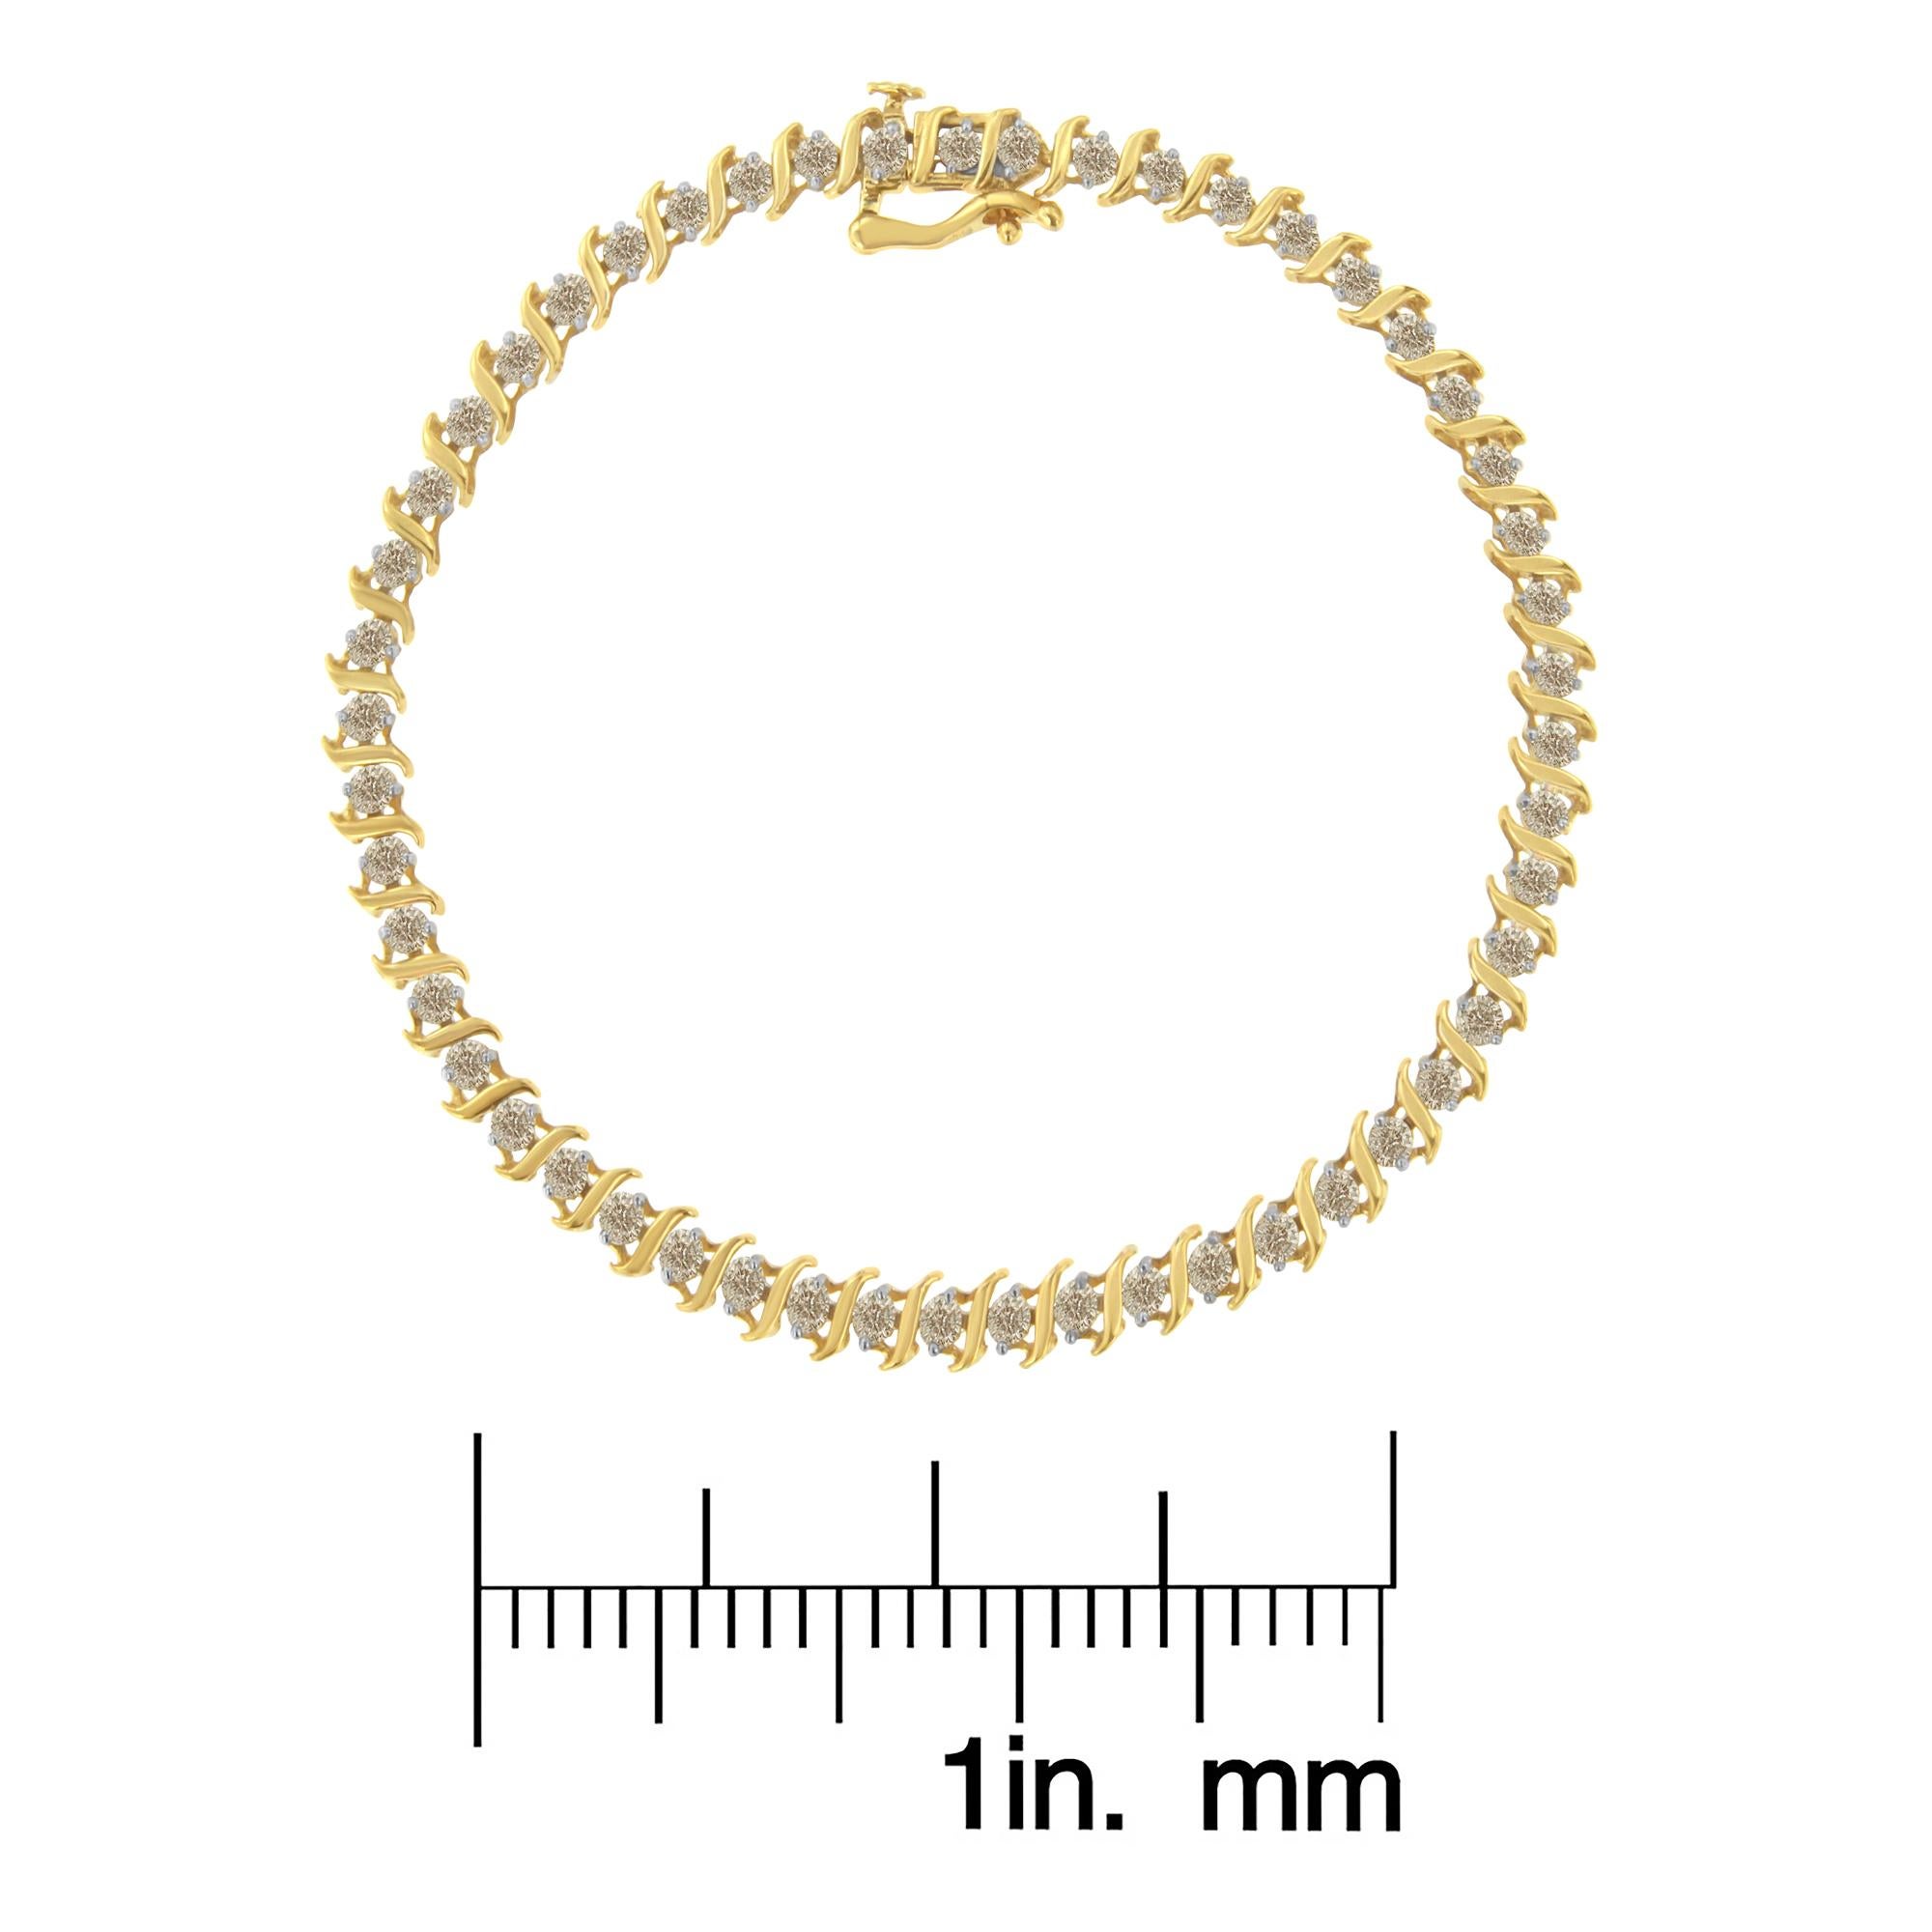 10K Yellow Gold 2.0 Carat Diamond Alternating Wave & Round Link Tennis Bracelet In New Condition For Sale In New York, NY